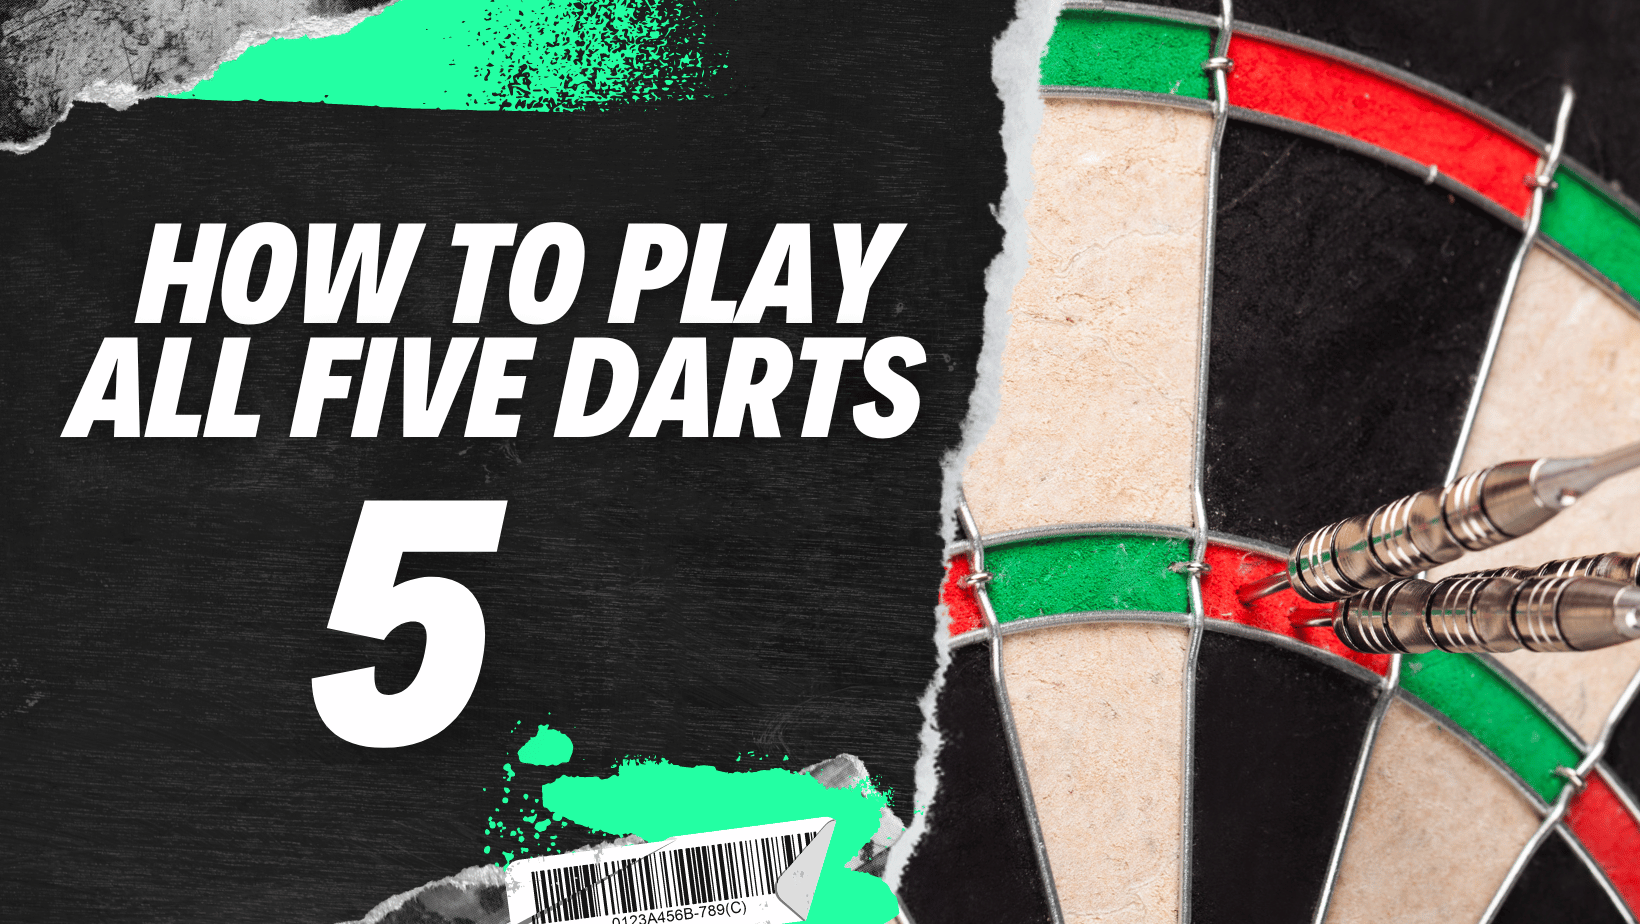 All Five or 51 by 5s Darts